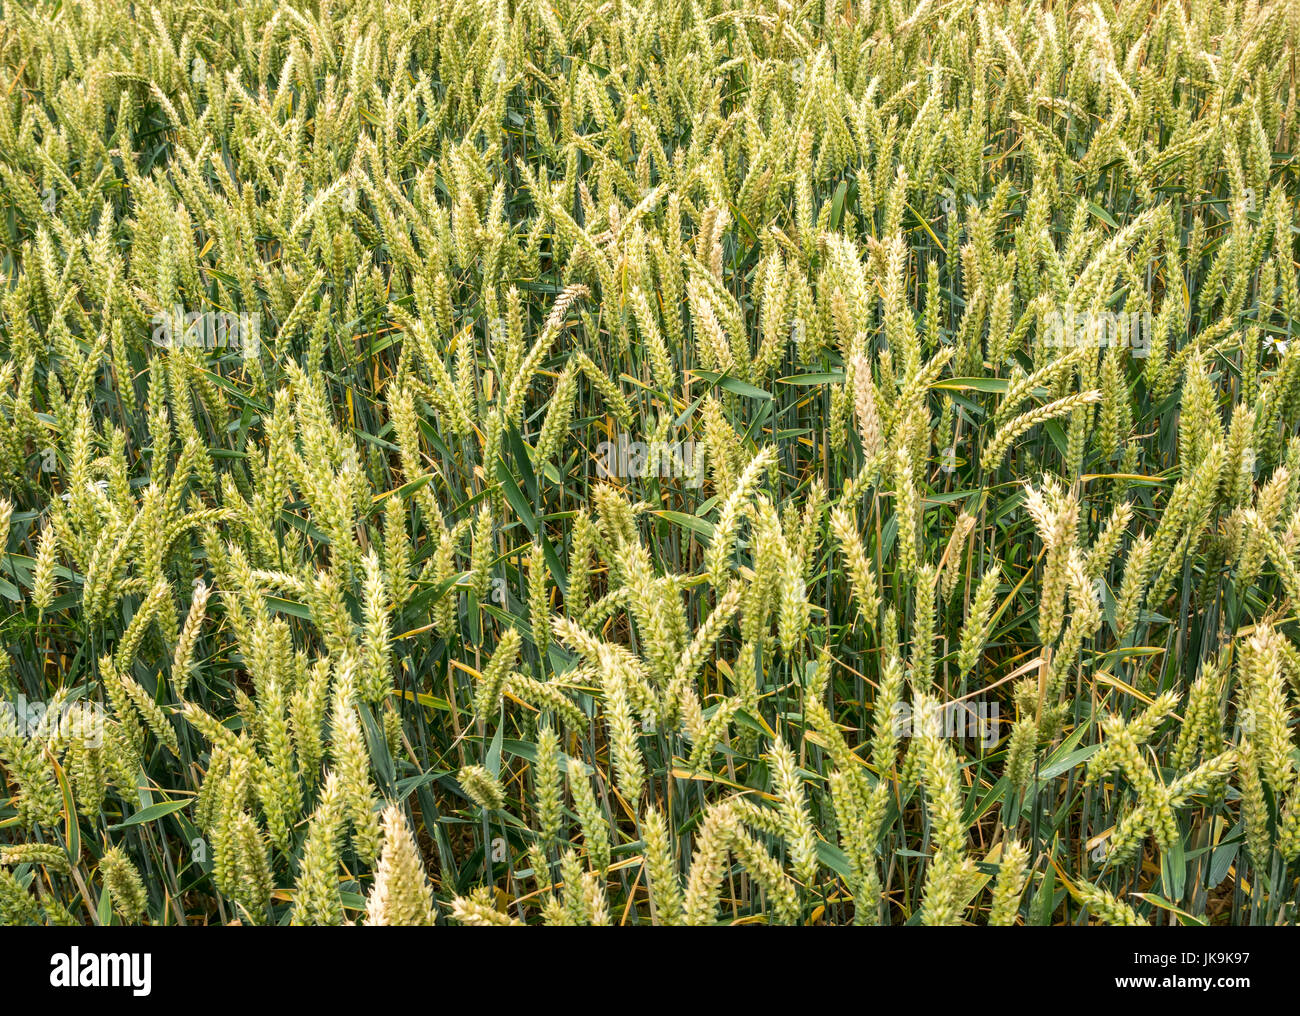 Close up of wheat crop growing in field, East Lothian, Scotland, UK Stock Photo